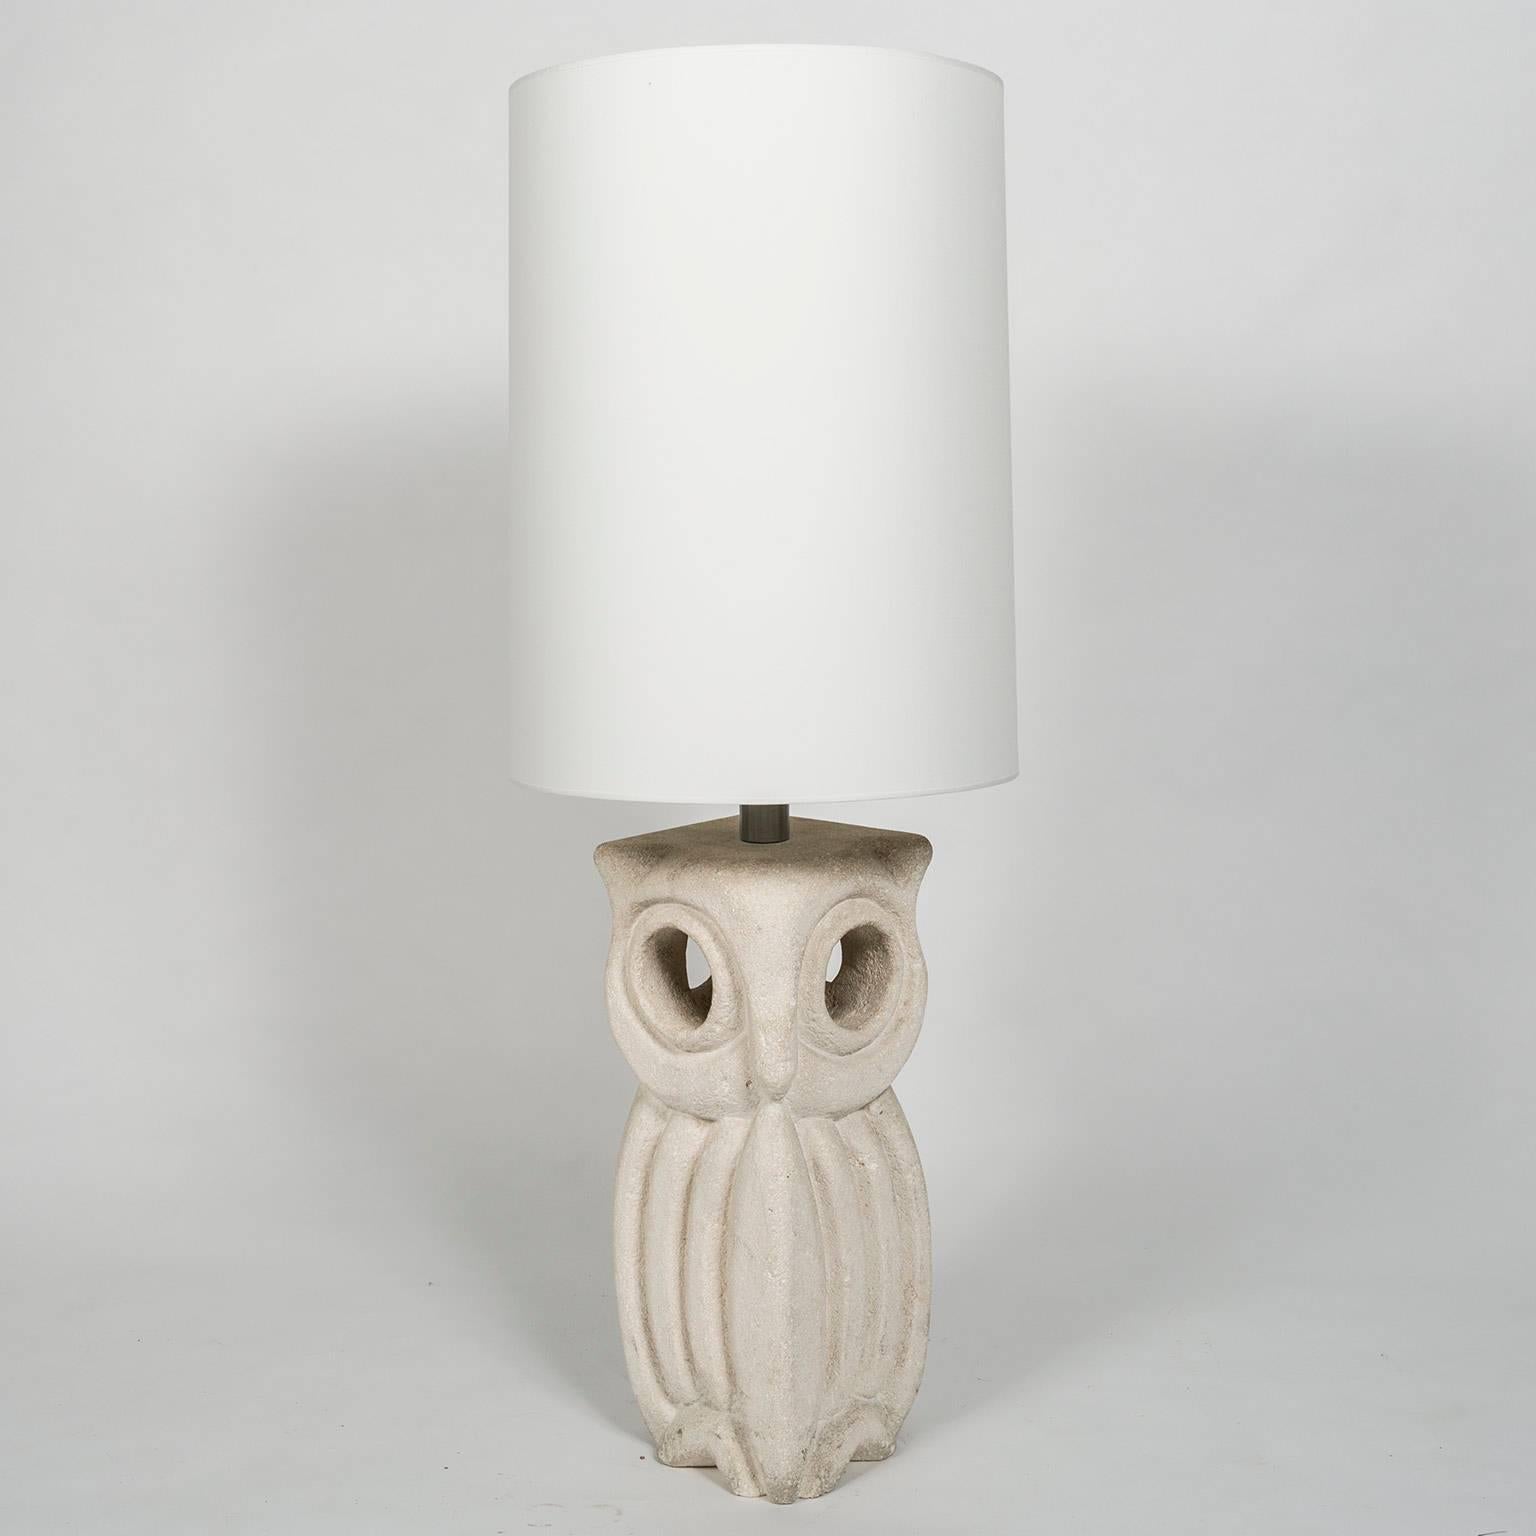 Very Large sculpted owl lamp or lantern in limestone by Albert Tormos. Albert Tormos worked in France during the 1970s and signed with initials AT. The lamp is electrified and has a white linen lampshade 21 inches tall and 16 inches in diameter. The